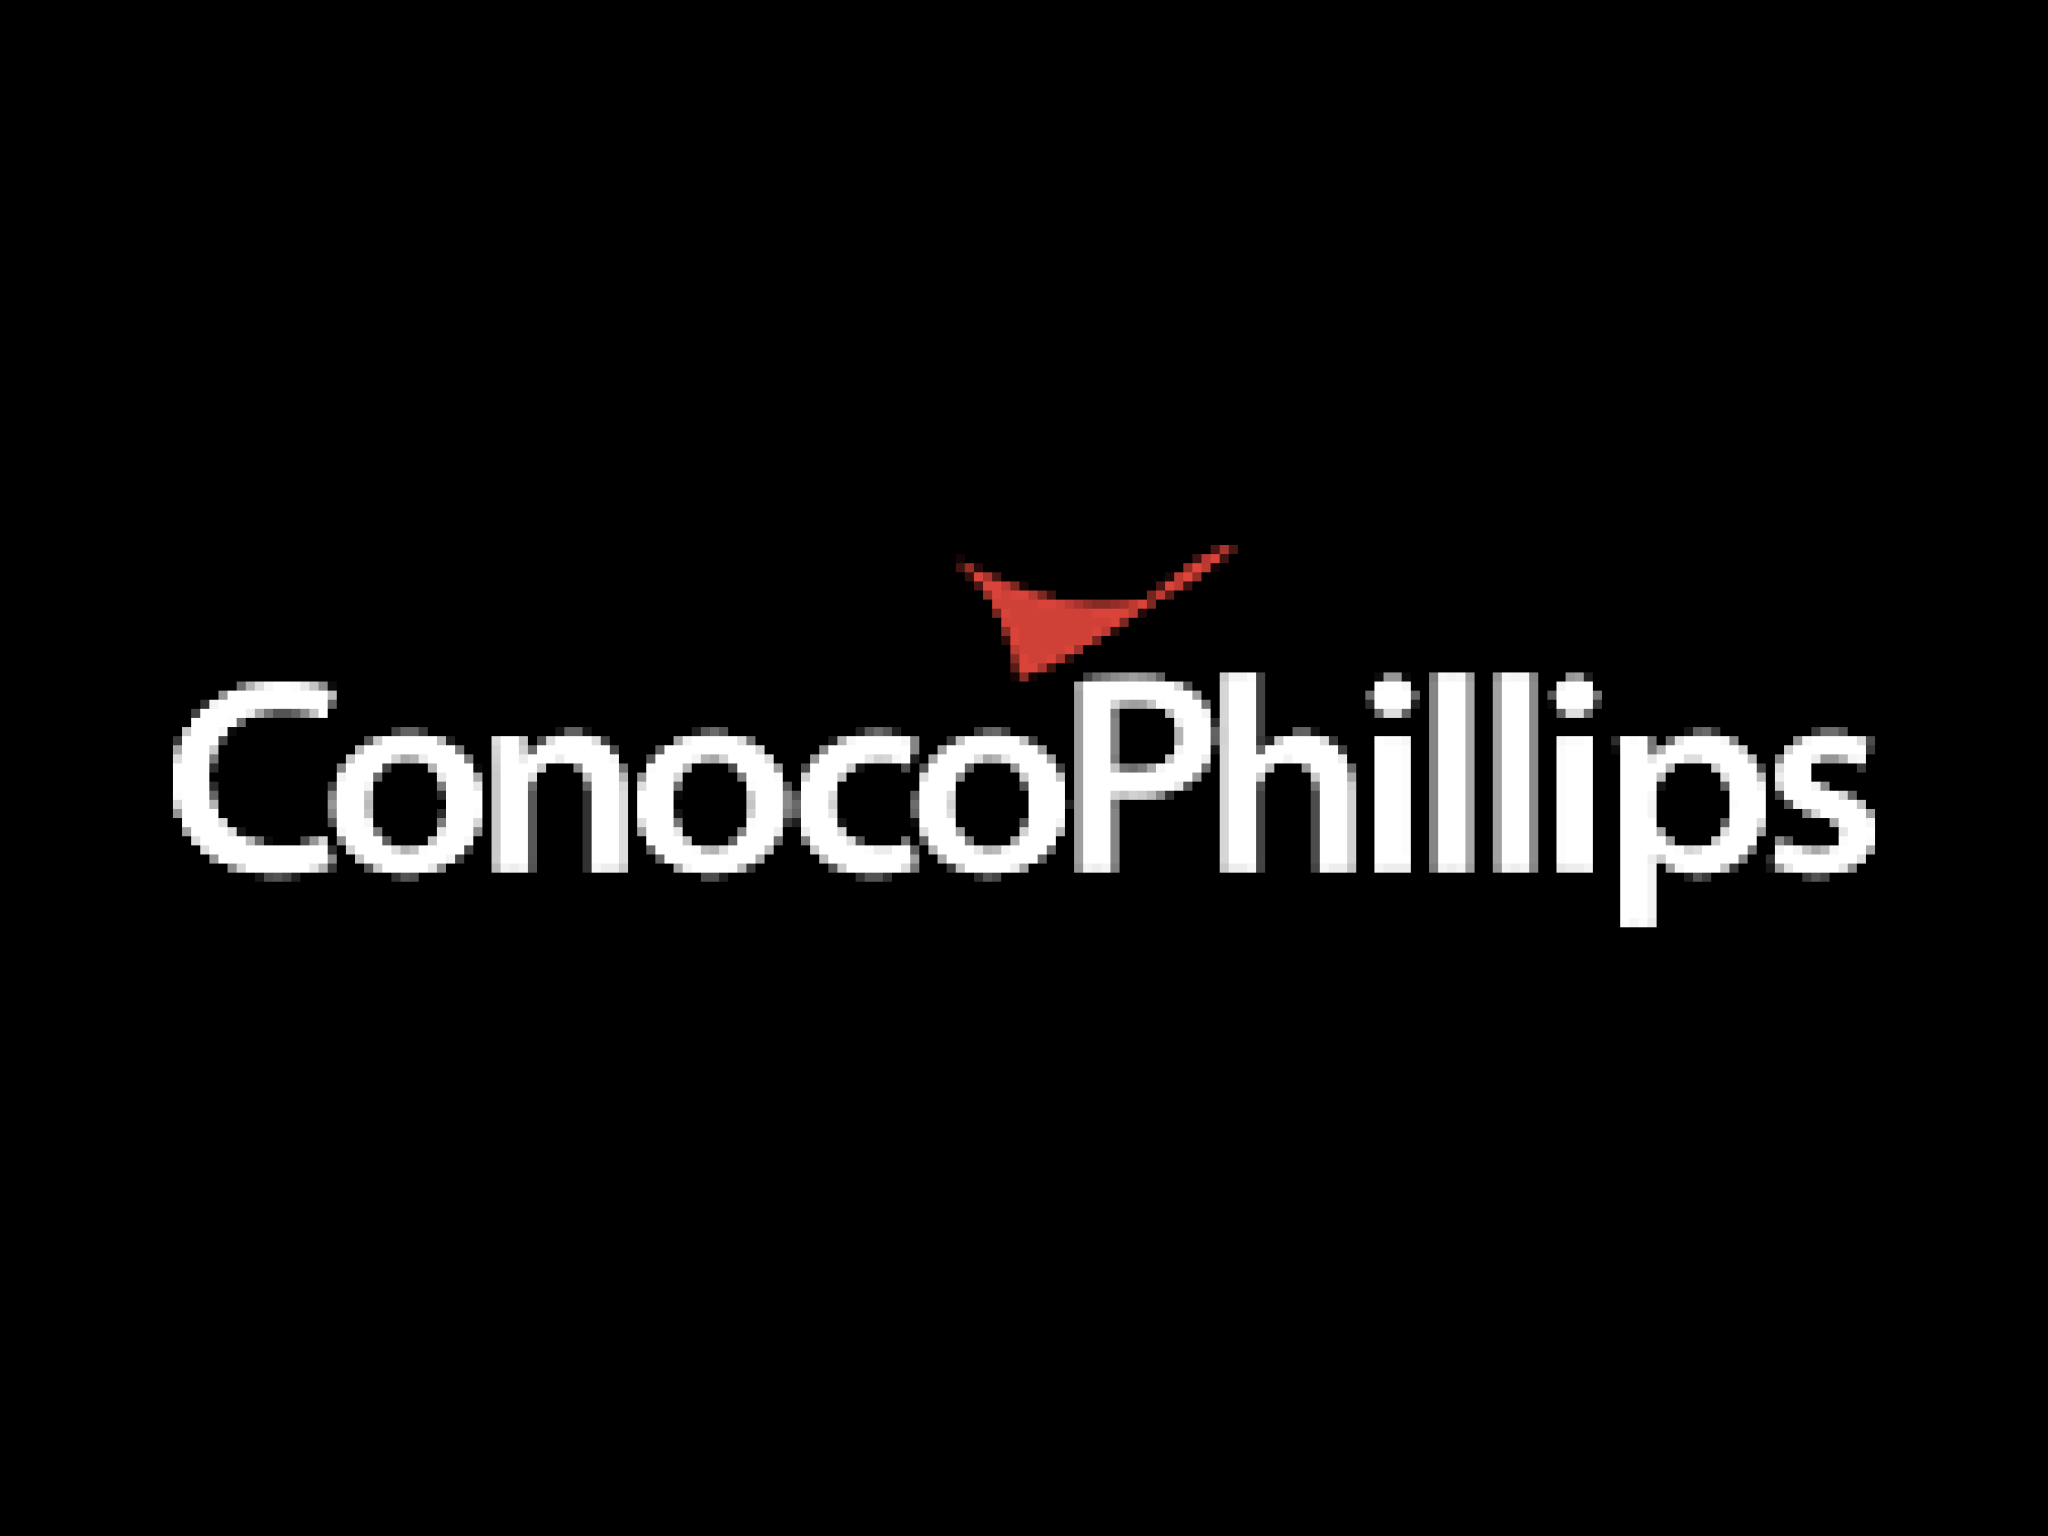  conocophillips-to-rally-over-30-here-are-10-other-price-target-changes-for-wednesday 